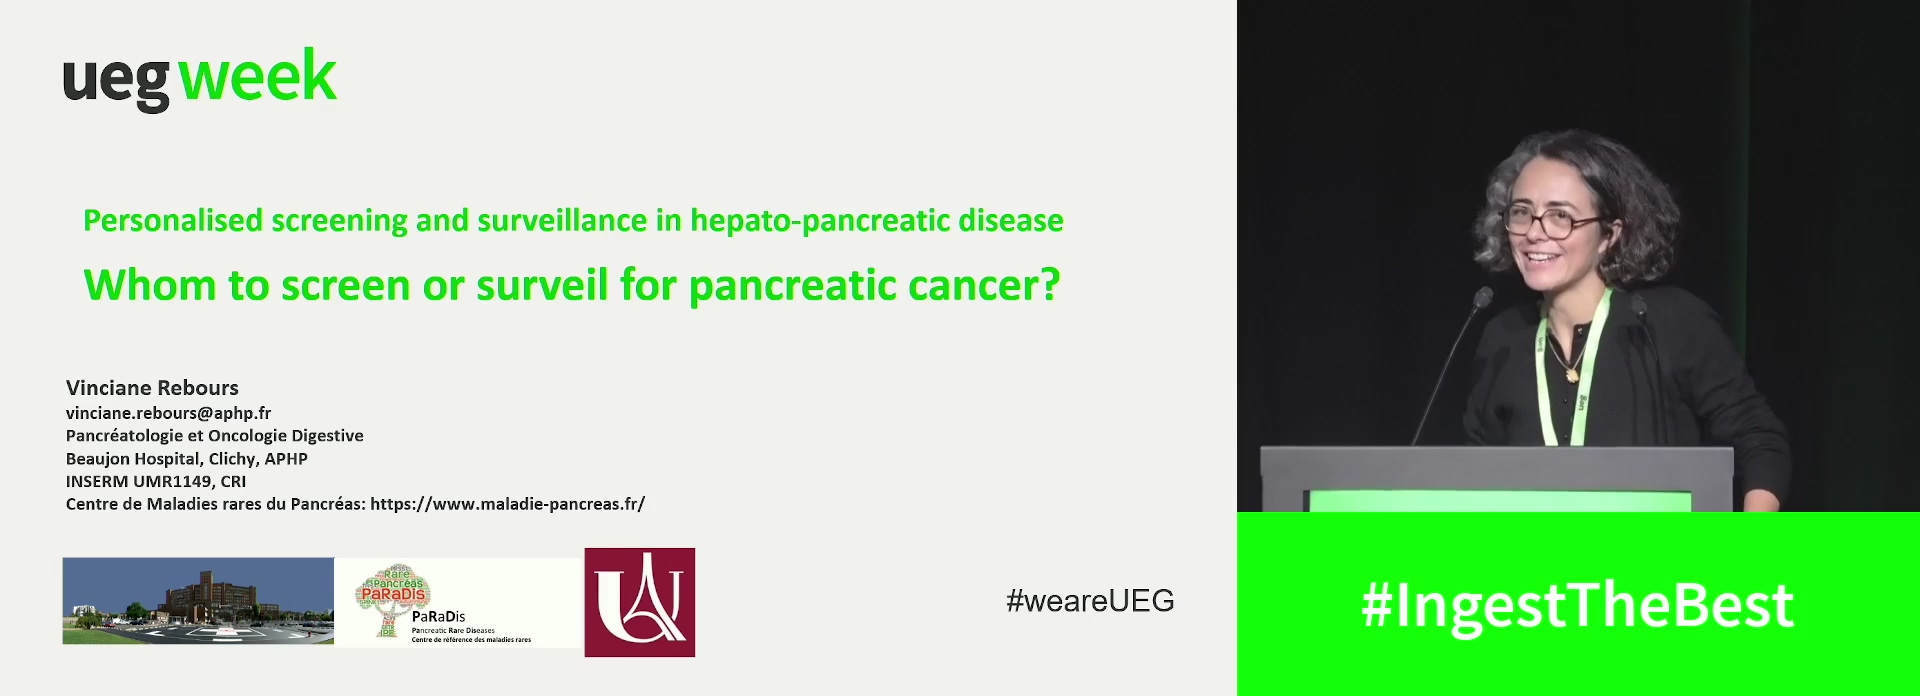 Whom to screen or surveil for pancreatic cancer?